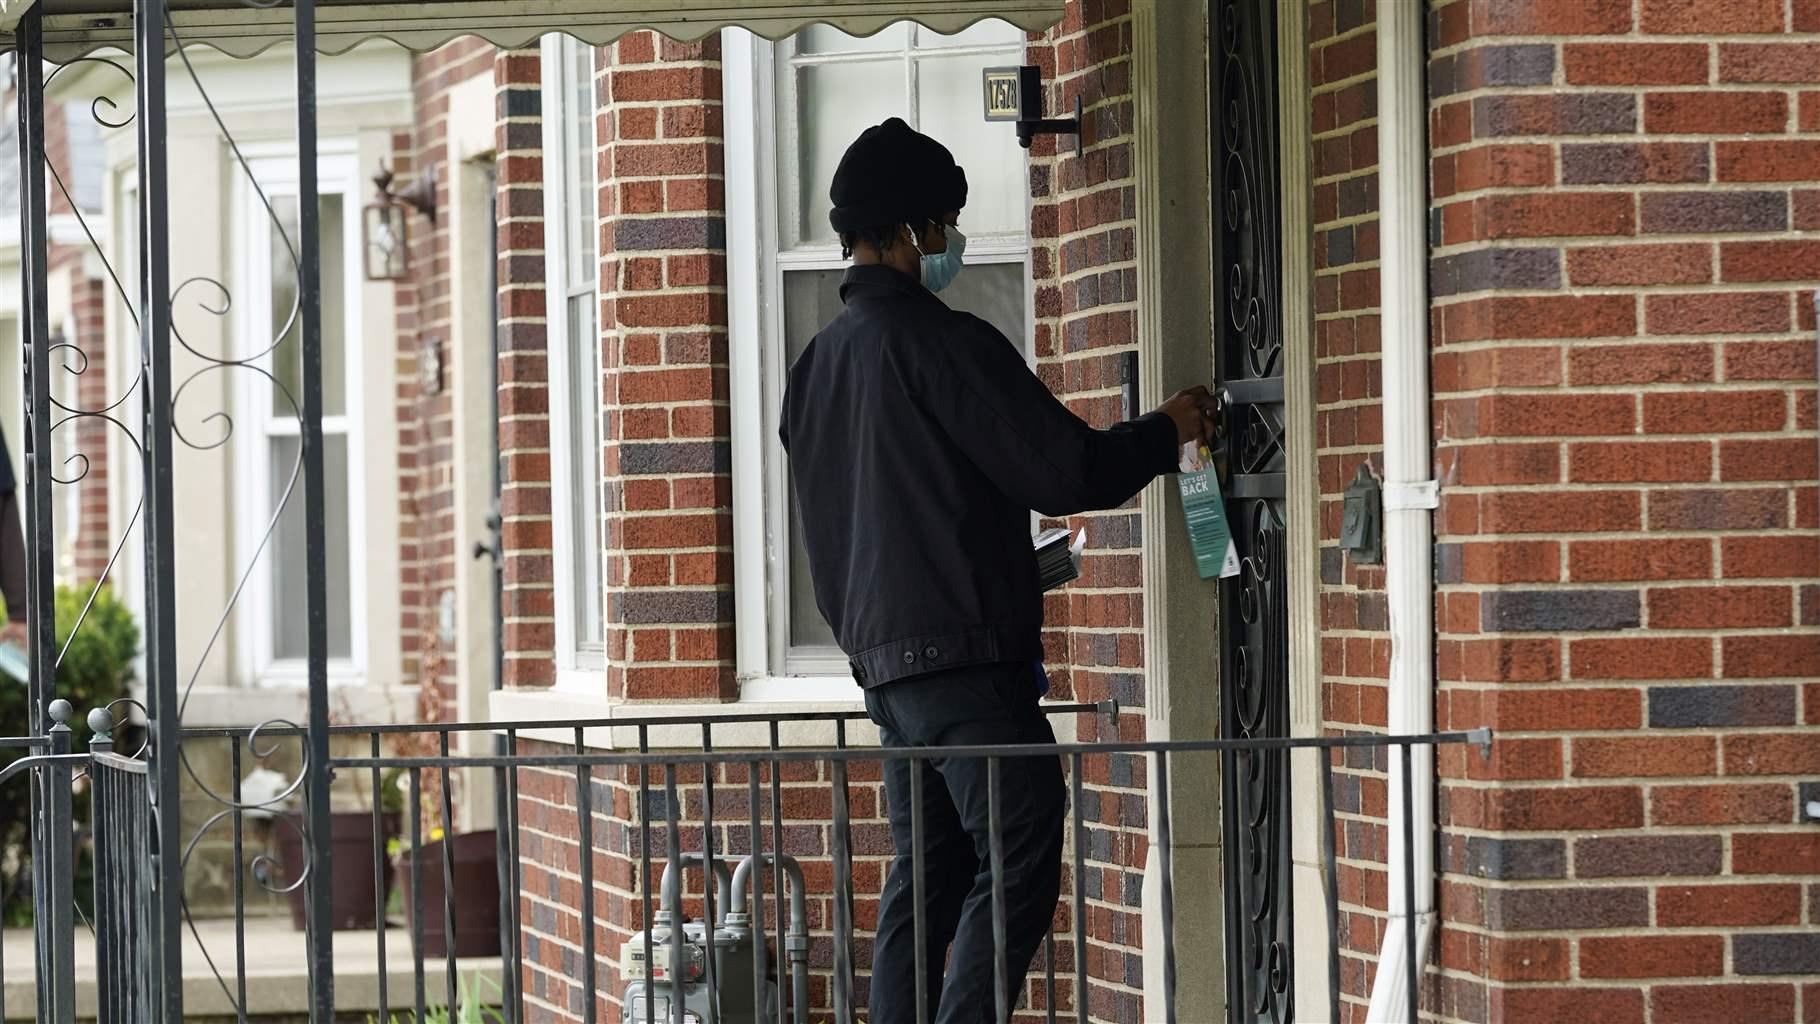 Deares Carey leaves a flyer on a home in Detroit, Tuesday, May 4, 2021. Officials are walking door-to-door to encourage residents of the majority Black city to get vaccinated against COVID-19 as the city's immunization rate lags well behind the rest of Michigan and the United States.